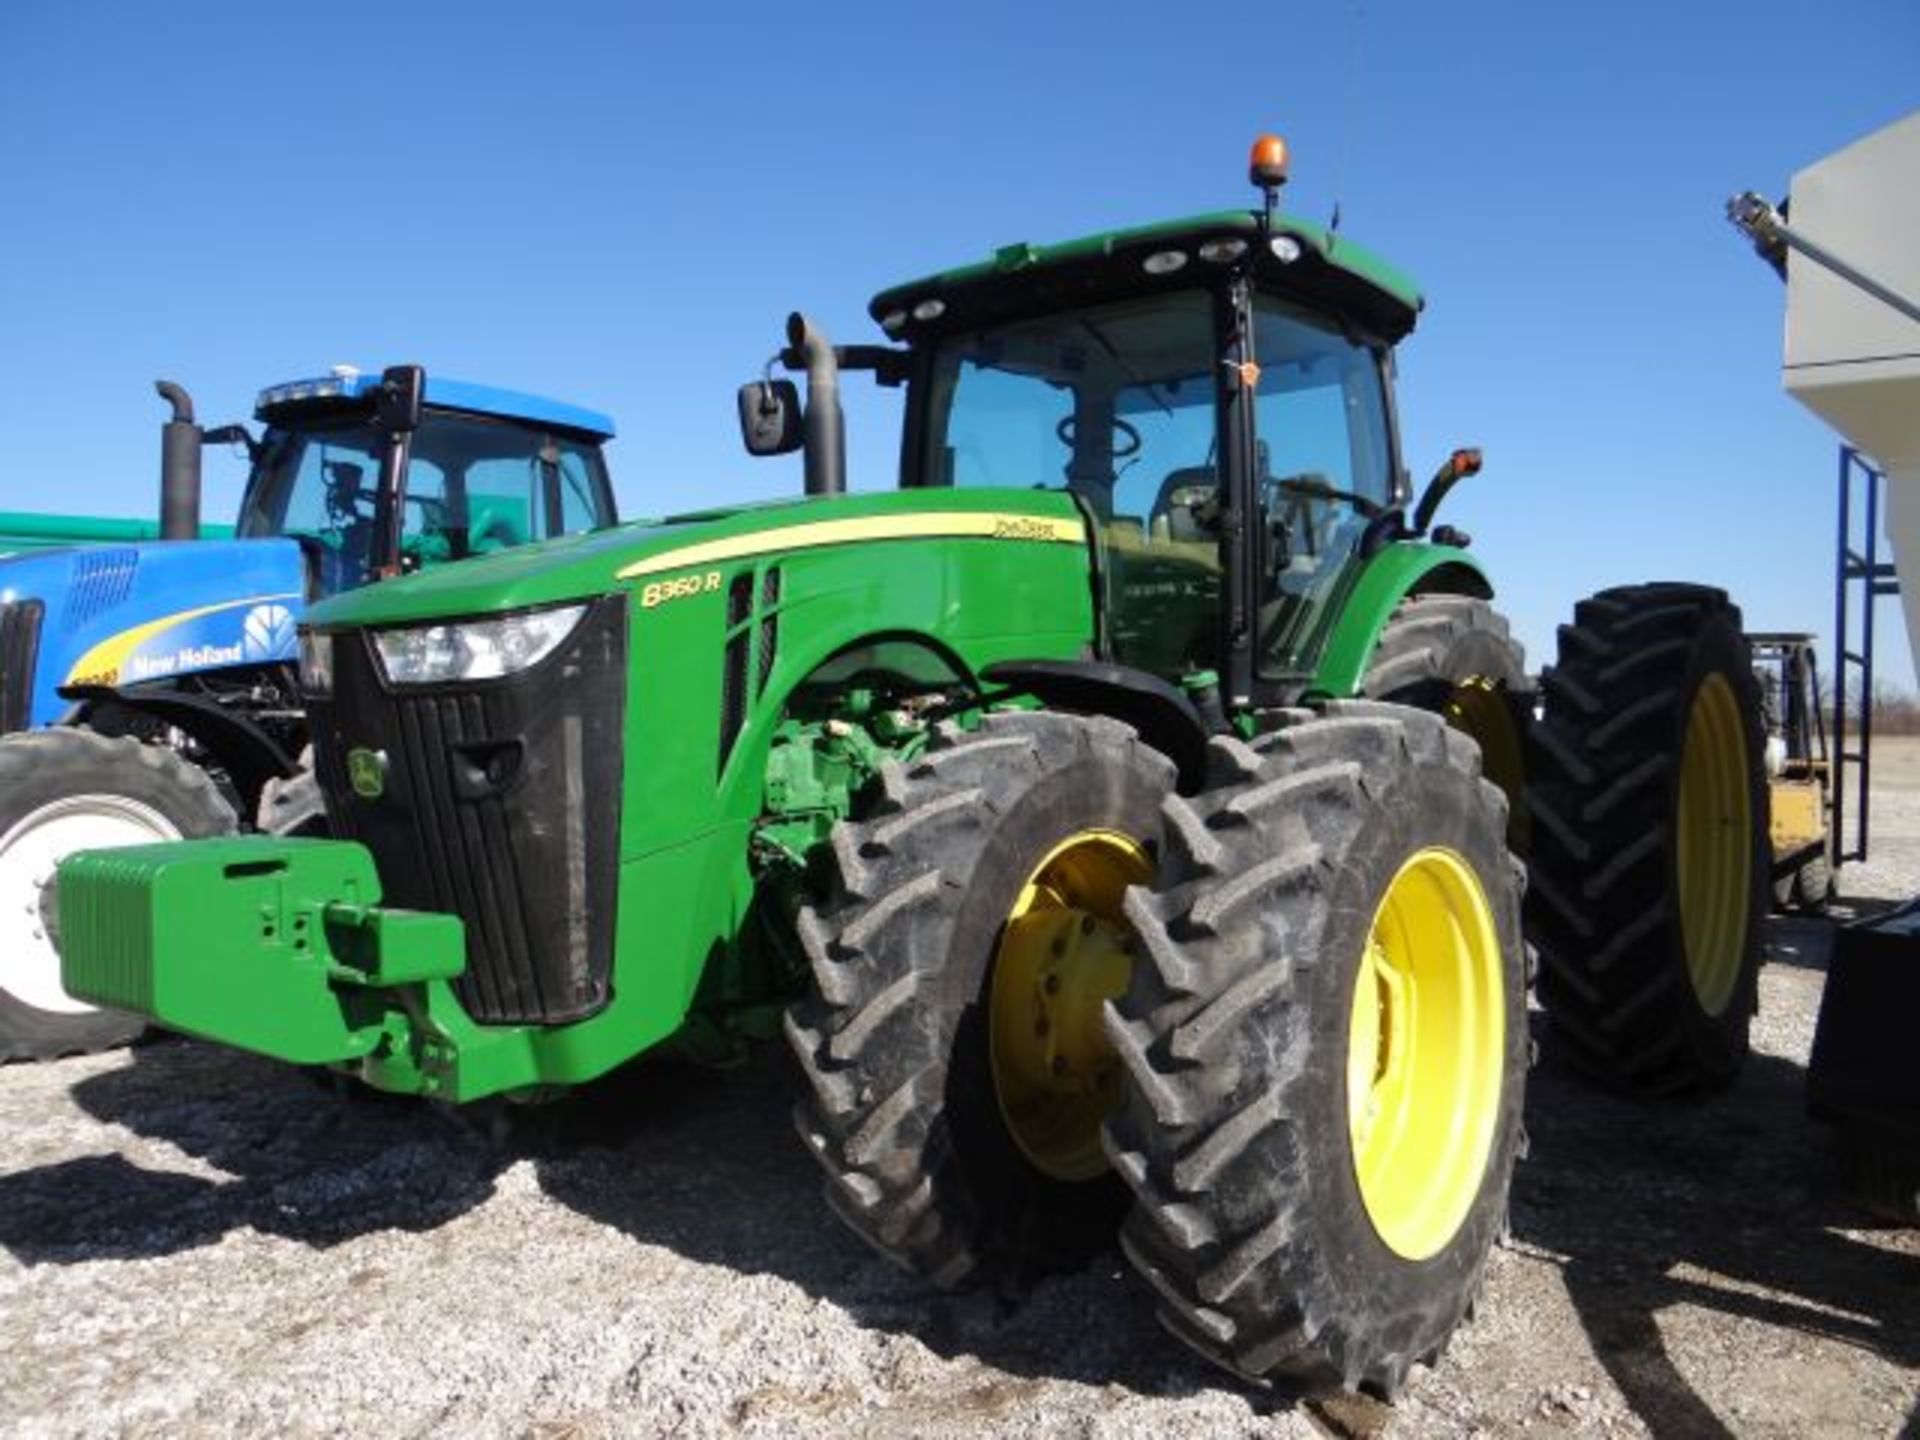 JD 8360R Tractor, 2012 50", Rear Tires, Front Duals, 4 Remotes, Auto Trac, IVT, ILS, Wts, 5244 hrs - Image 4 of 6